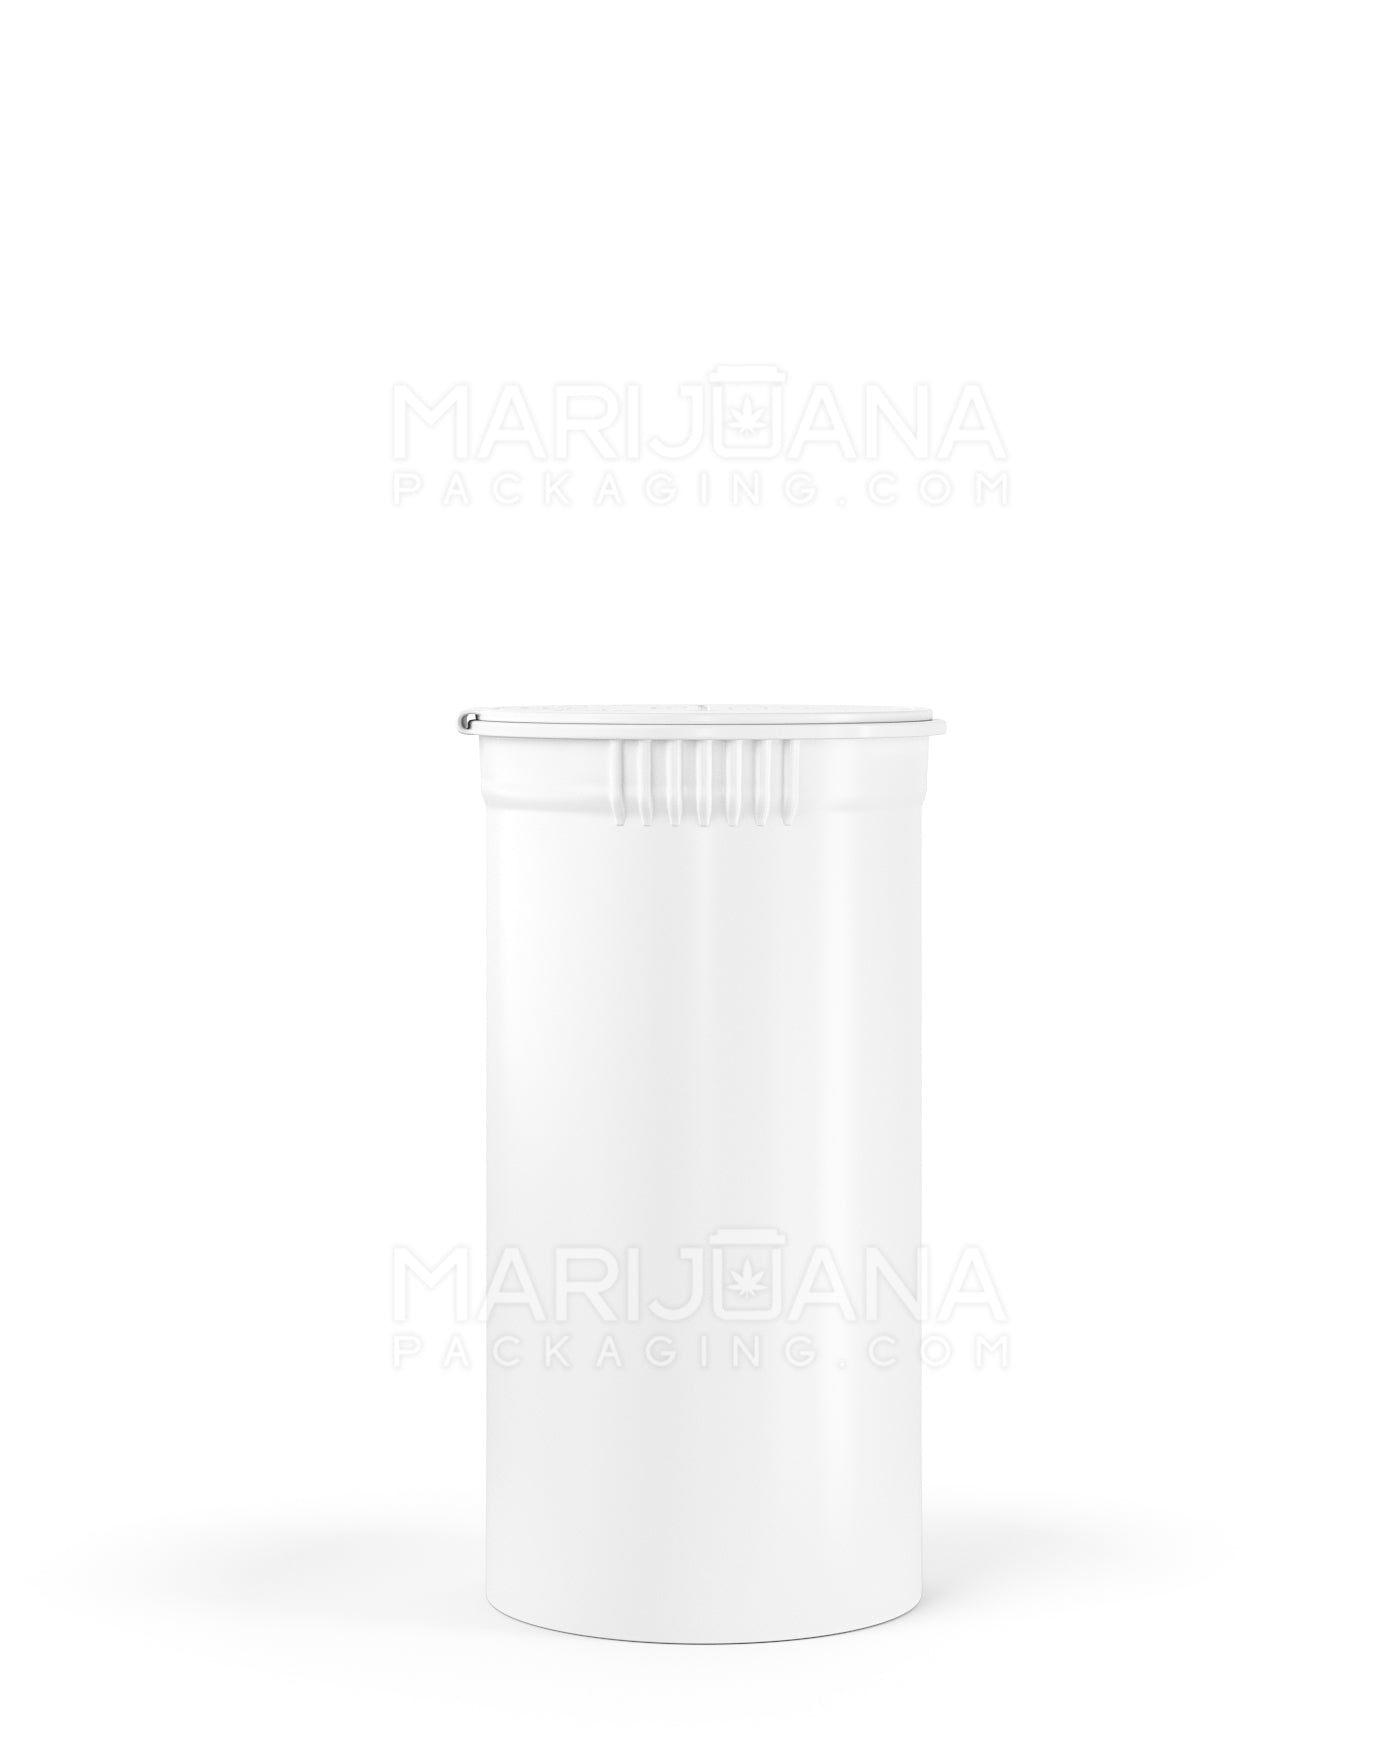 Child Resistant & Sustainable | 100% Biodegradable Opaque White Pop Top Bottles | 13dr - 2g - 315 Count - 2